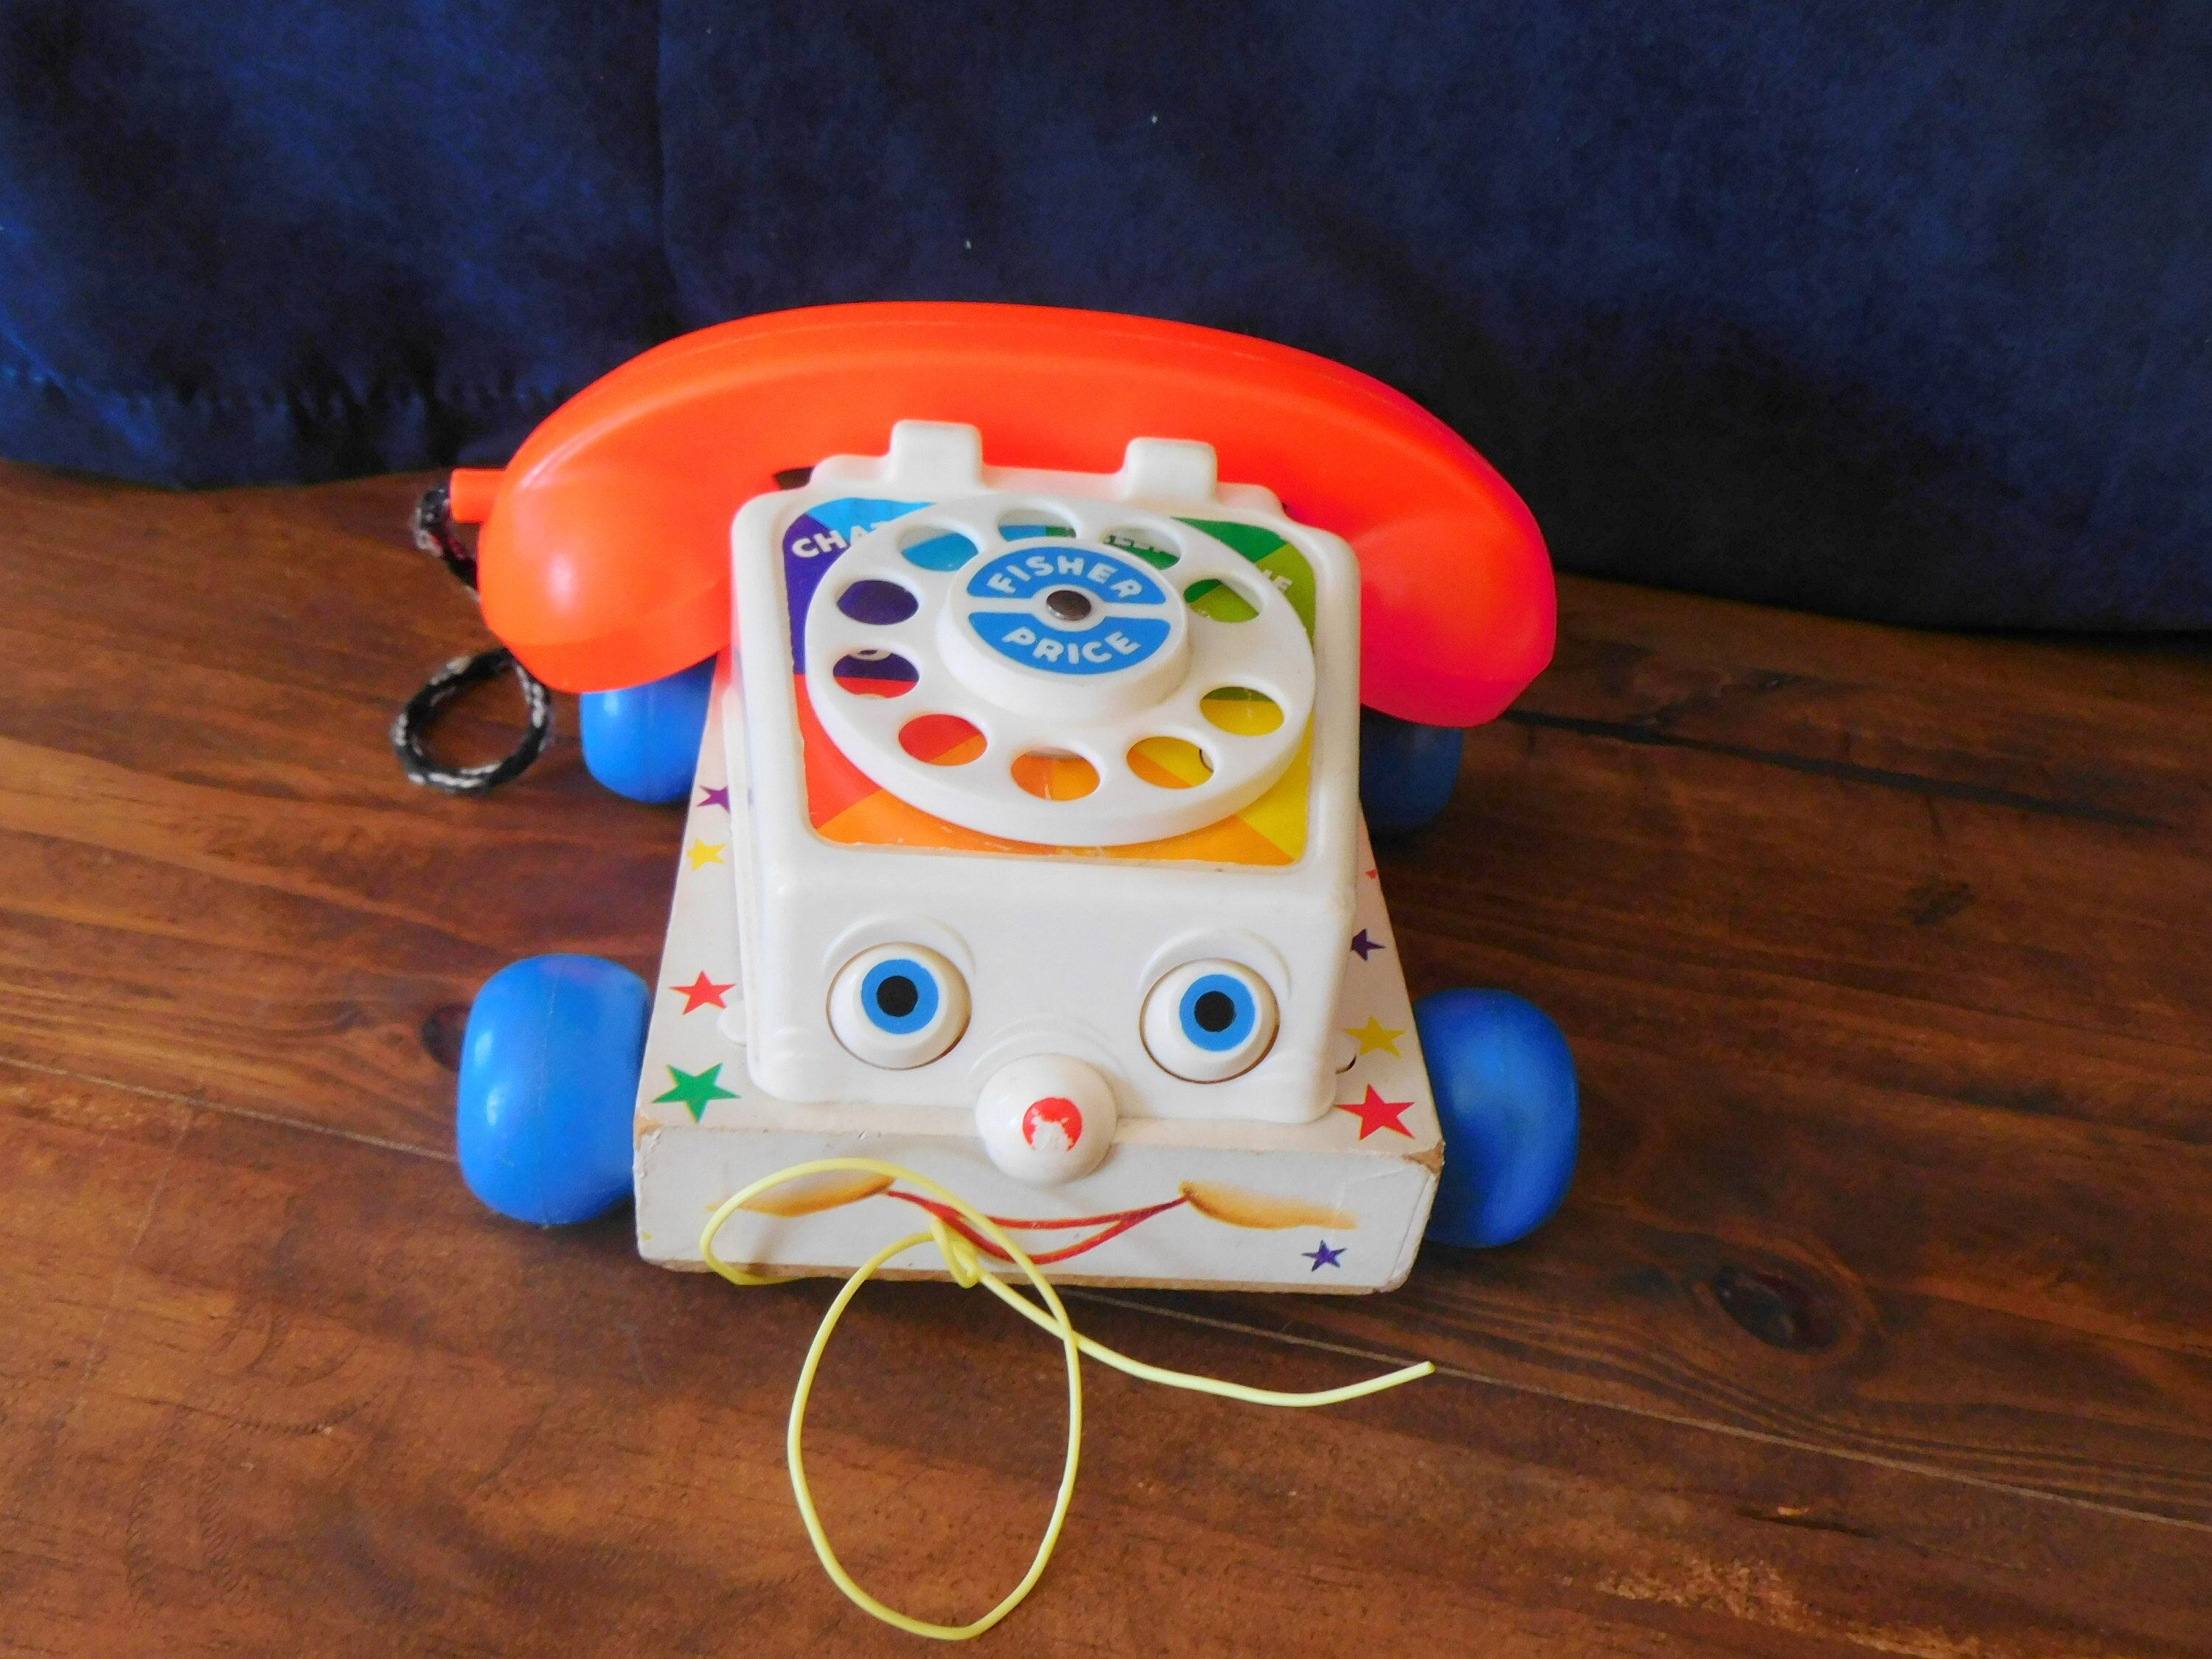  Fisher Price Classics Retro Chatter Phone : Toys & Games